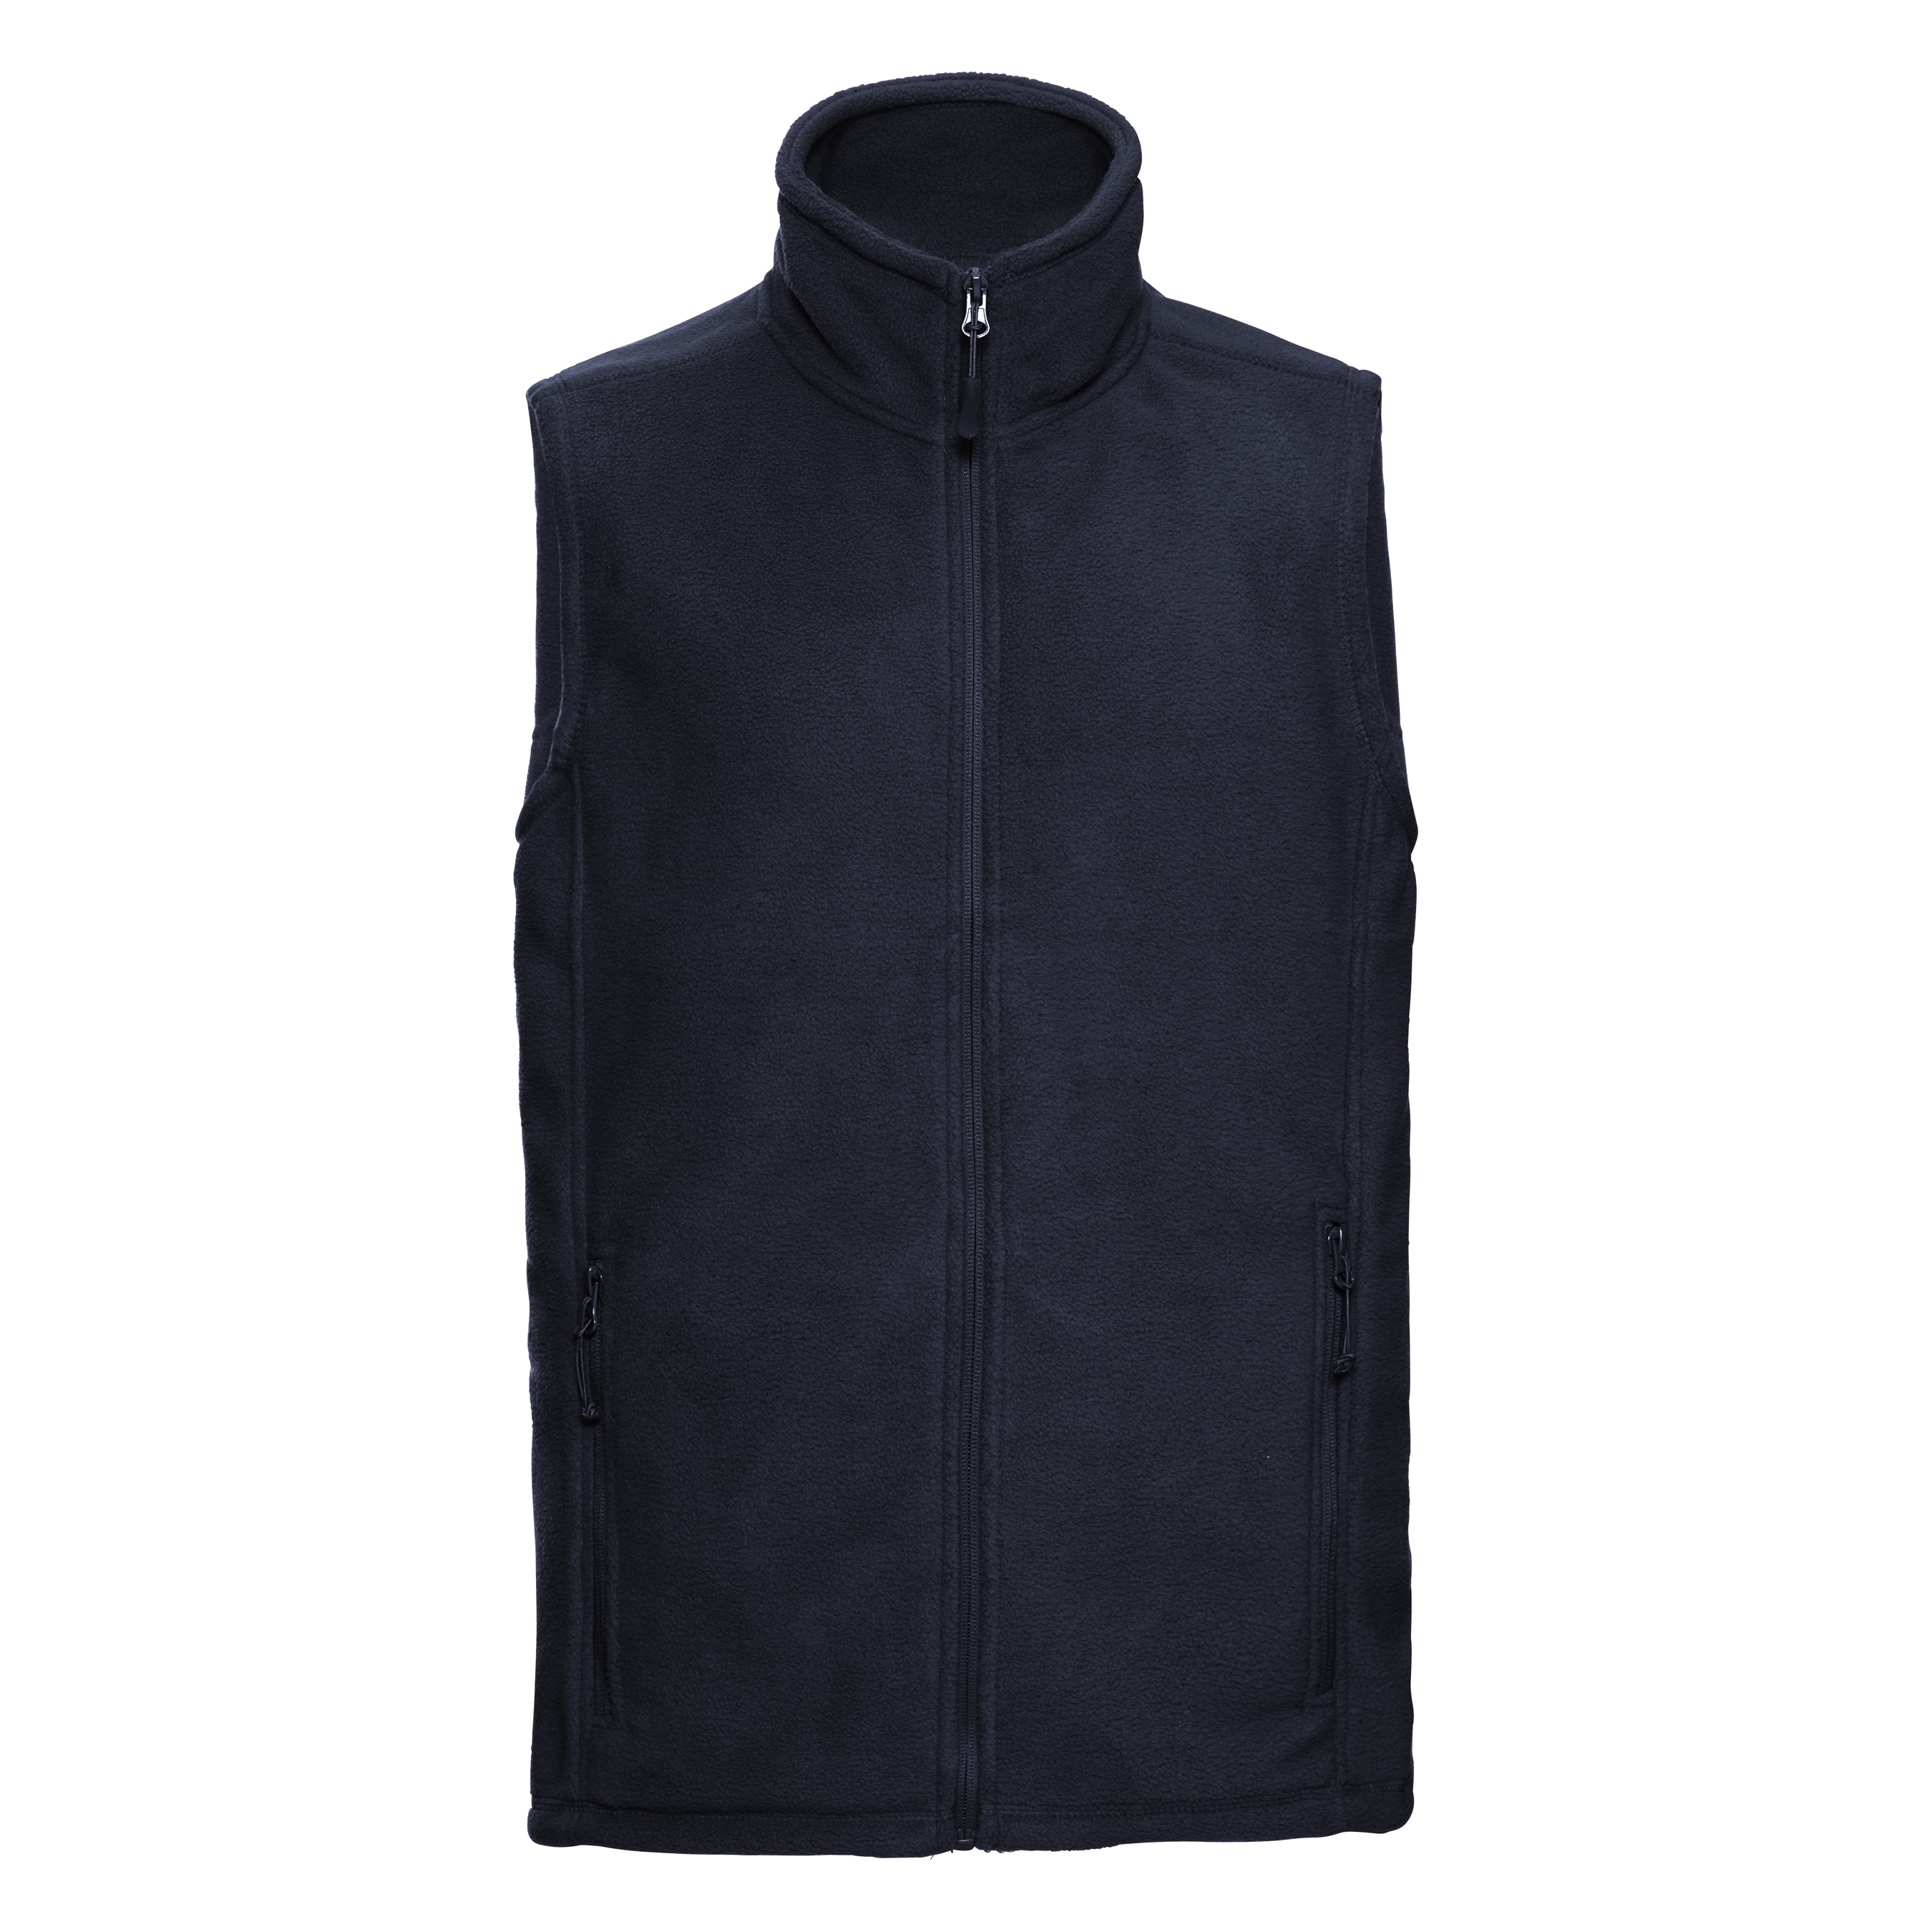 ax-httpswebsystems.s3.amazonaws.comtmp_for_downloadrussell-outdoor-fleece-gilet-french-navy.jpeg